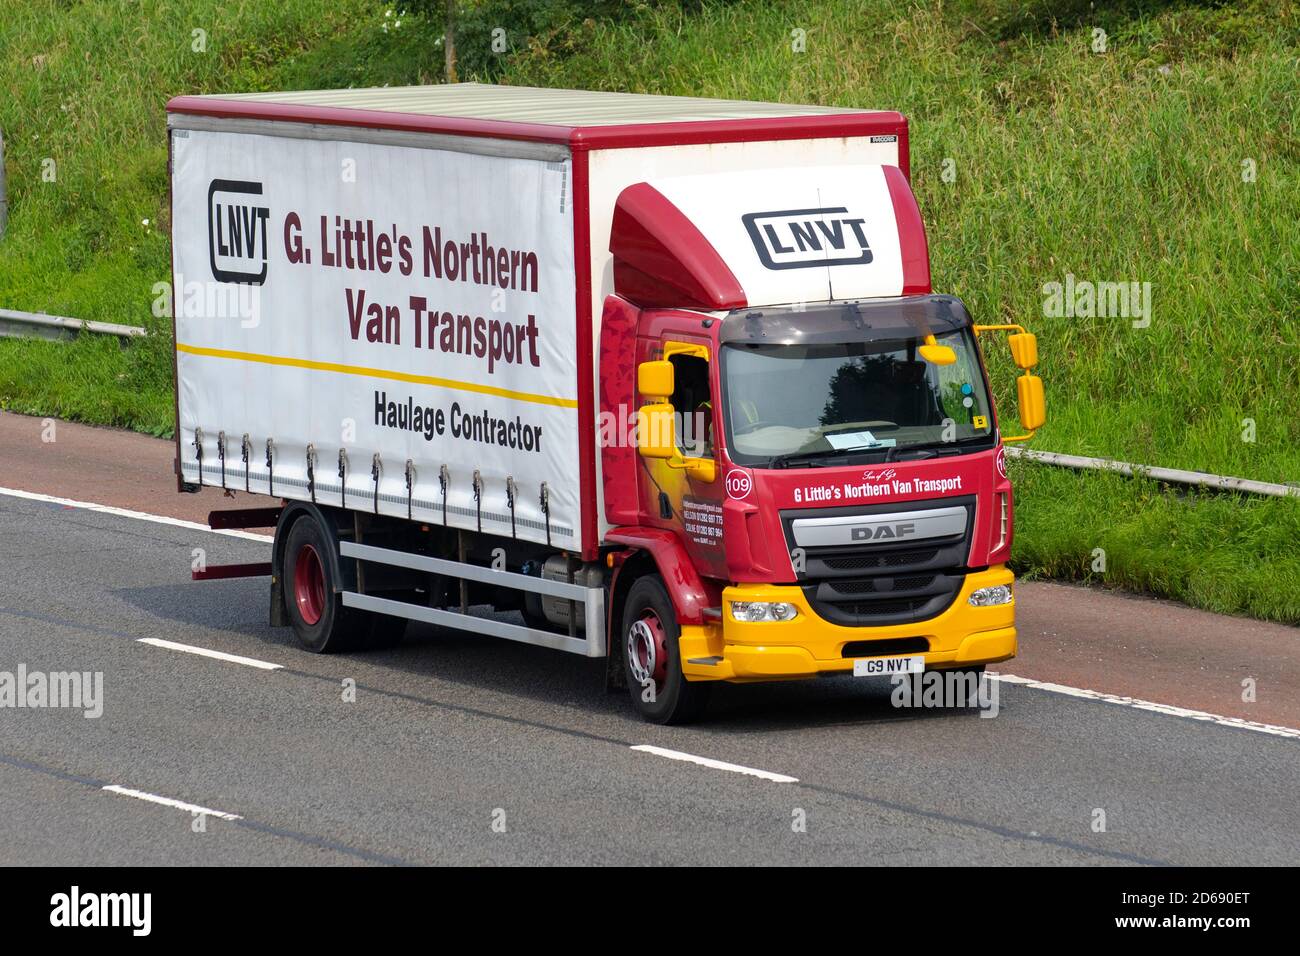 G Little's Northern van transport; Rigid Haulage delivery trucks, lorry, heavy-duty vehicles,transportation, truck, cargo carrier, DAF vehicle, European commercial transport industry HGV, M6 at Manchester, UK Stock Photo